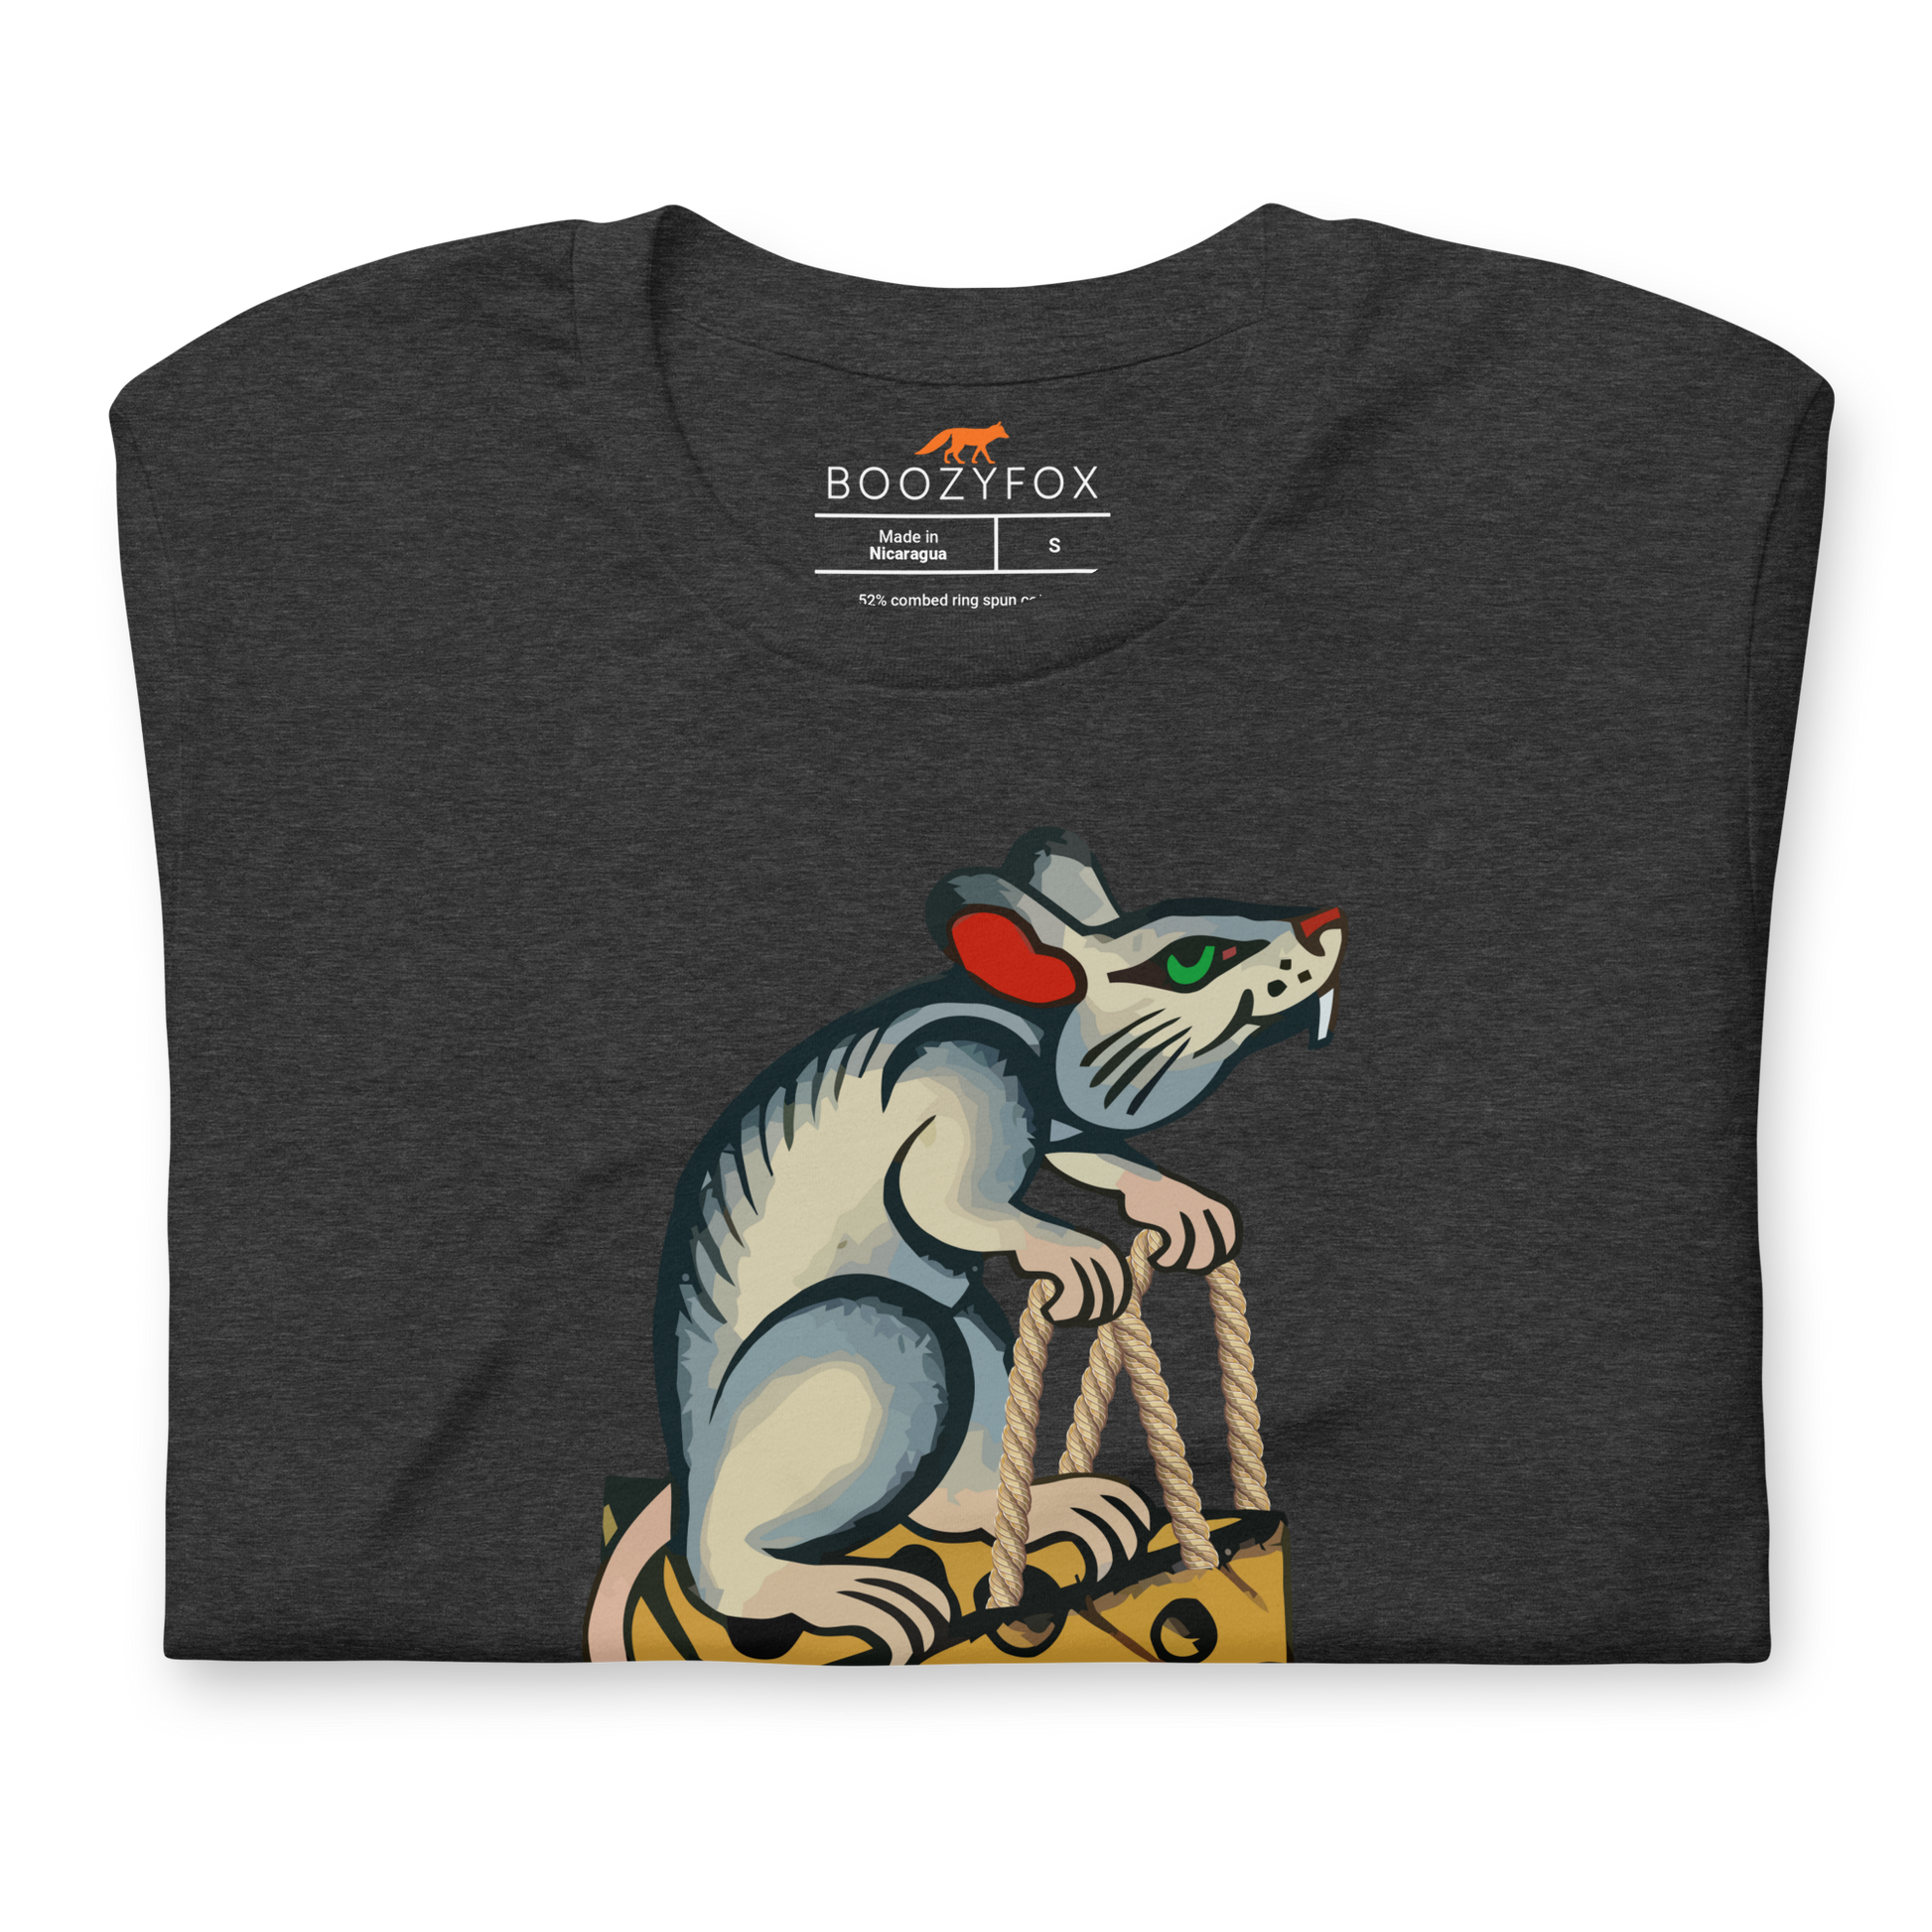 Front details of a Dark Grey Heather Premium Rat T-Shirt featuring a hilarious Cheese The Day graphic on the chest - Funny Graphic Rat Tees - Boozy Fox